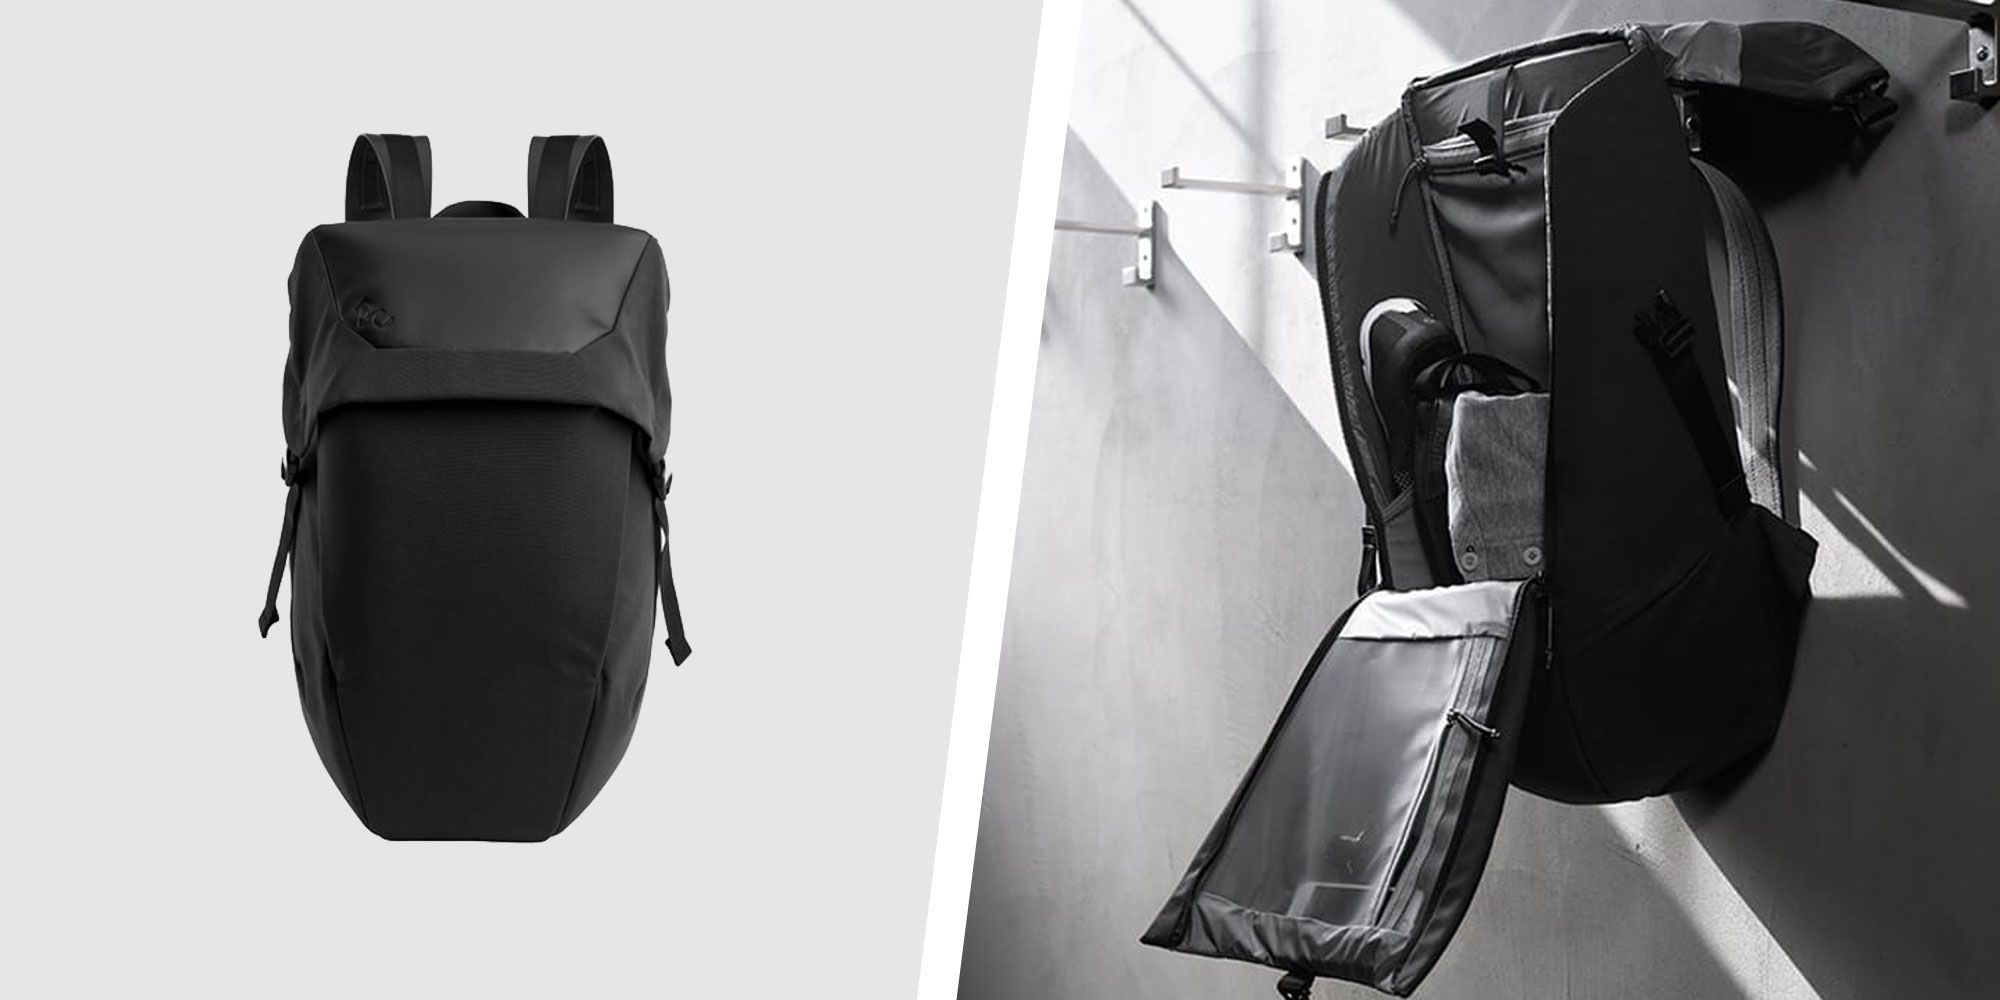 lululemon command the day commute bag review